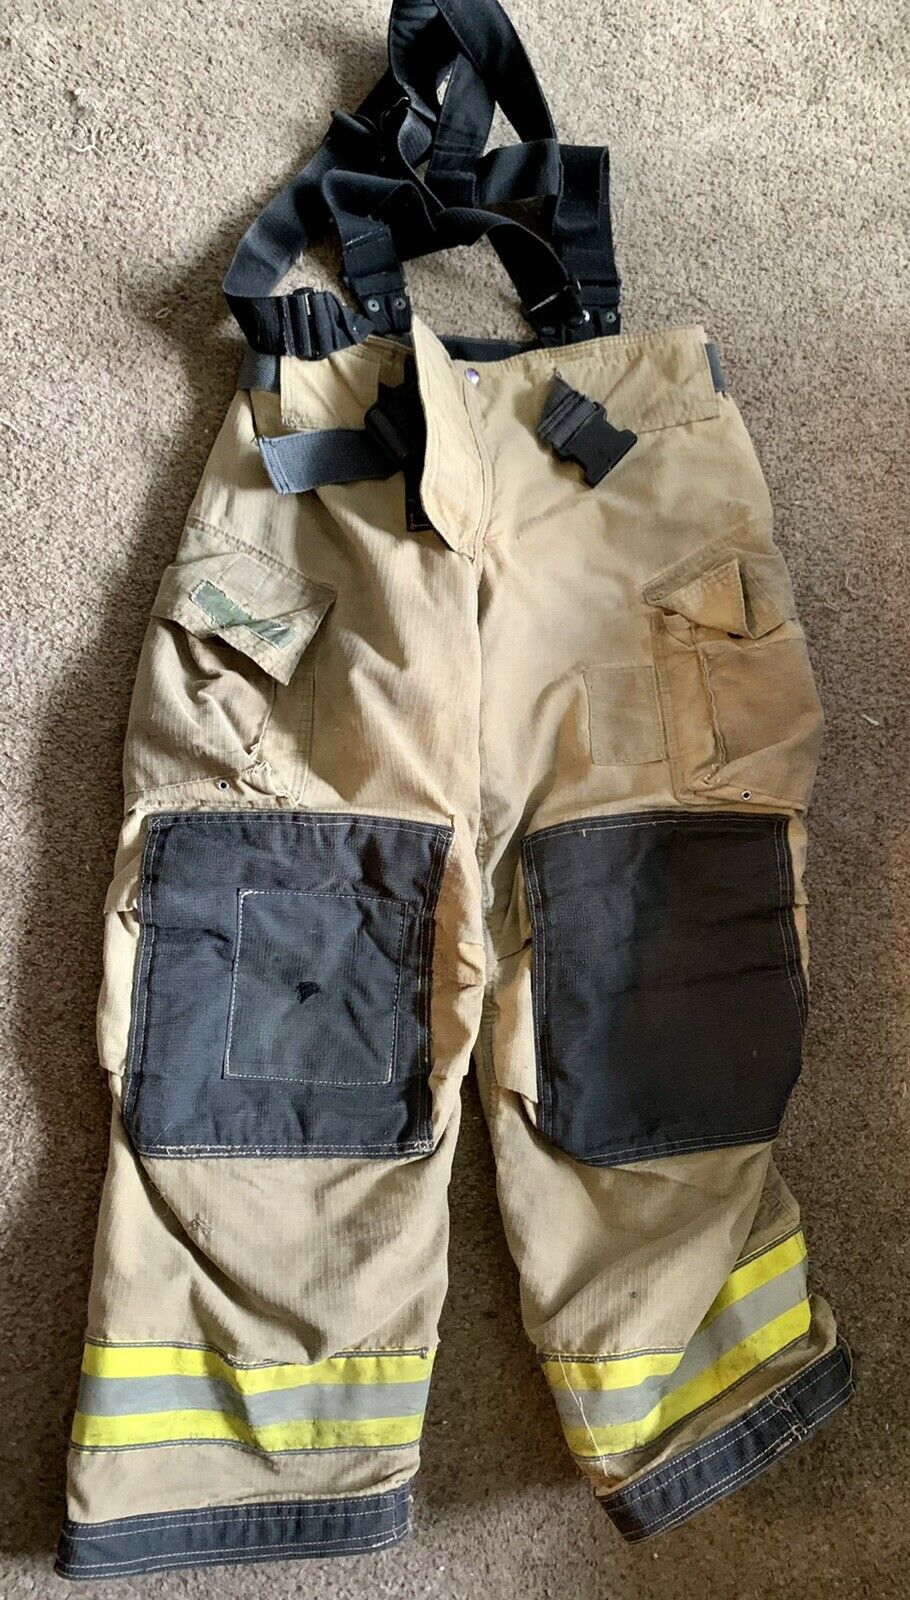 Cairns Reaxtion Turnout Bunker Pants 34 X 30 Used - Good Condition